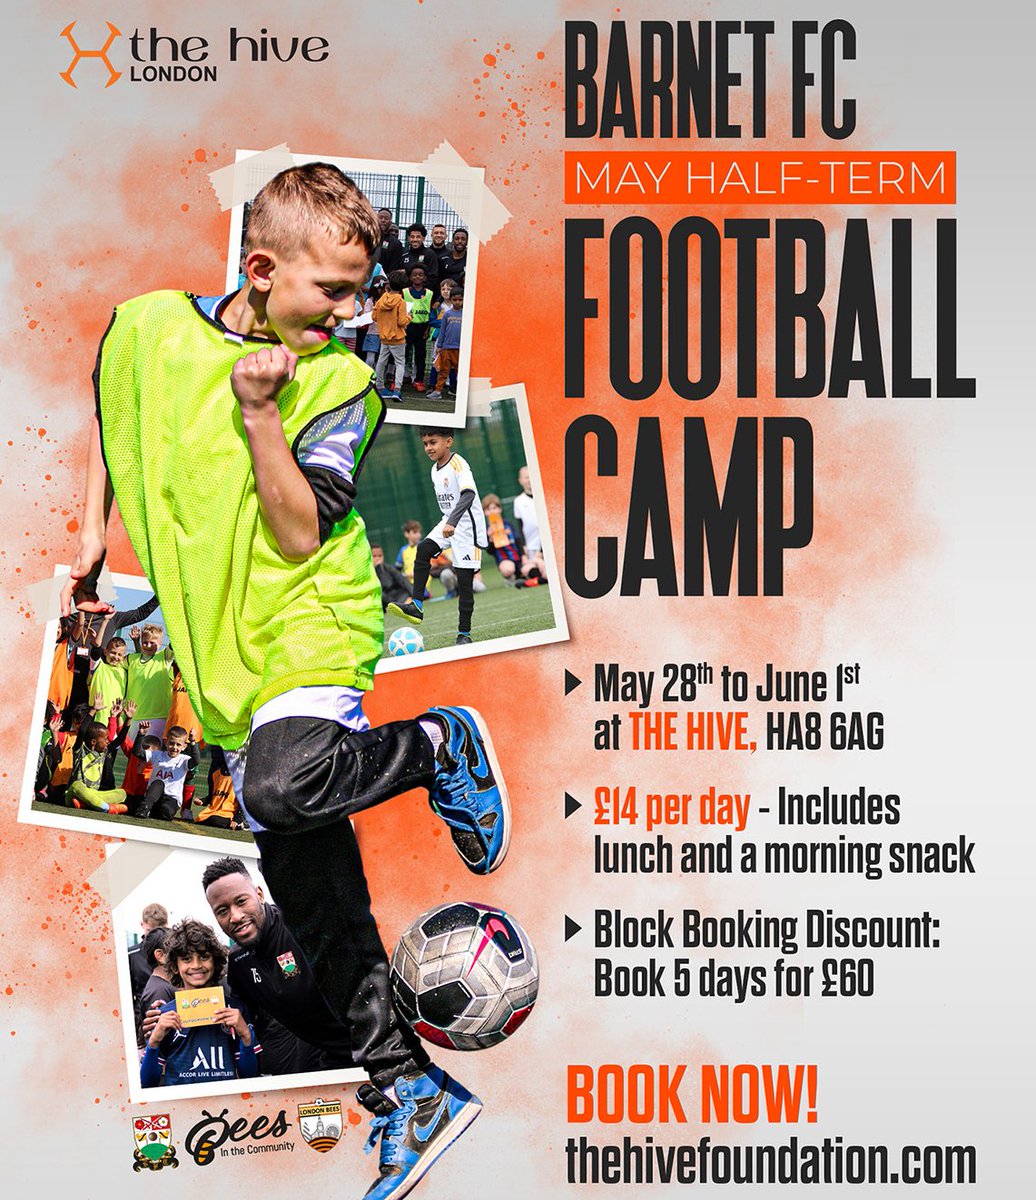 Hey there football fans! ⚽ 

Don't miss out on the Barnet FC Football Camp happening from May 28th to June 1st! 

It's only £14 per day and includes lunch and a morning snack! 😋 
TheHiveFoundation.com 
#footballcamp #BarnetFC #soccer #sports #footballfun #summercamp #football